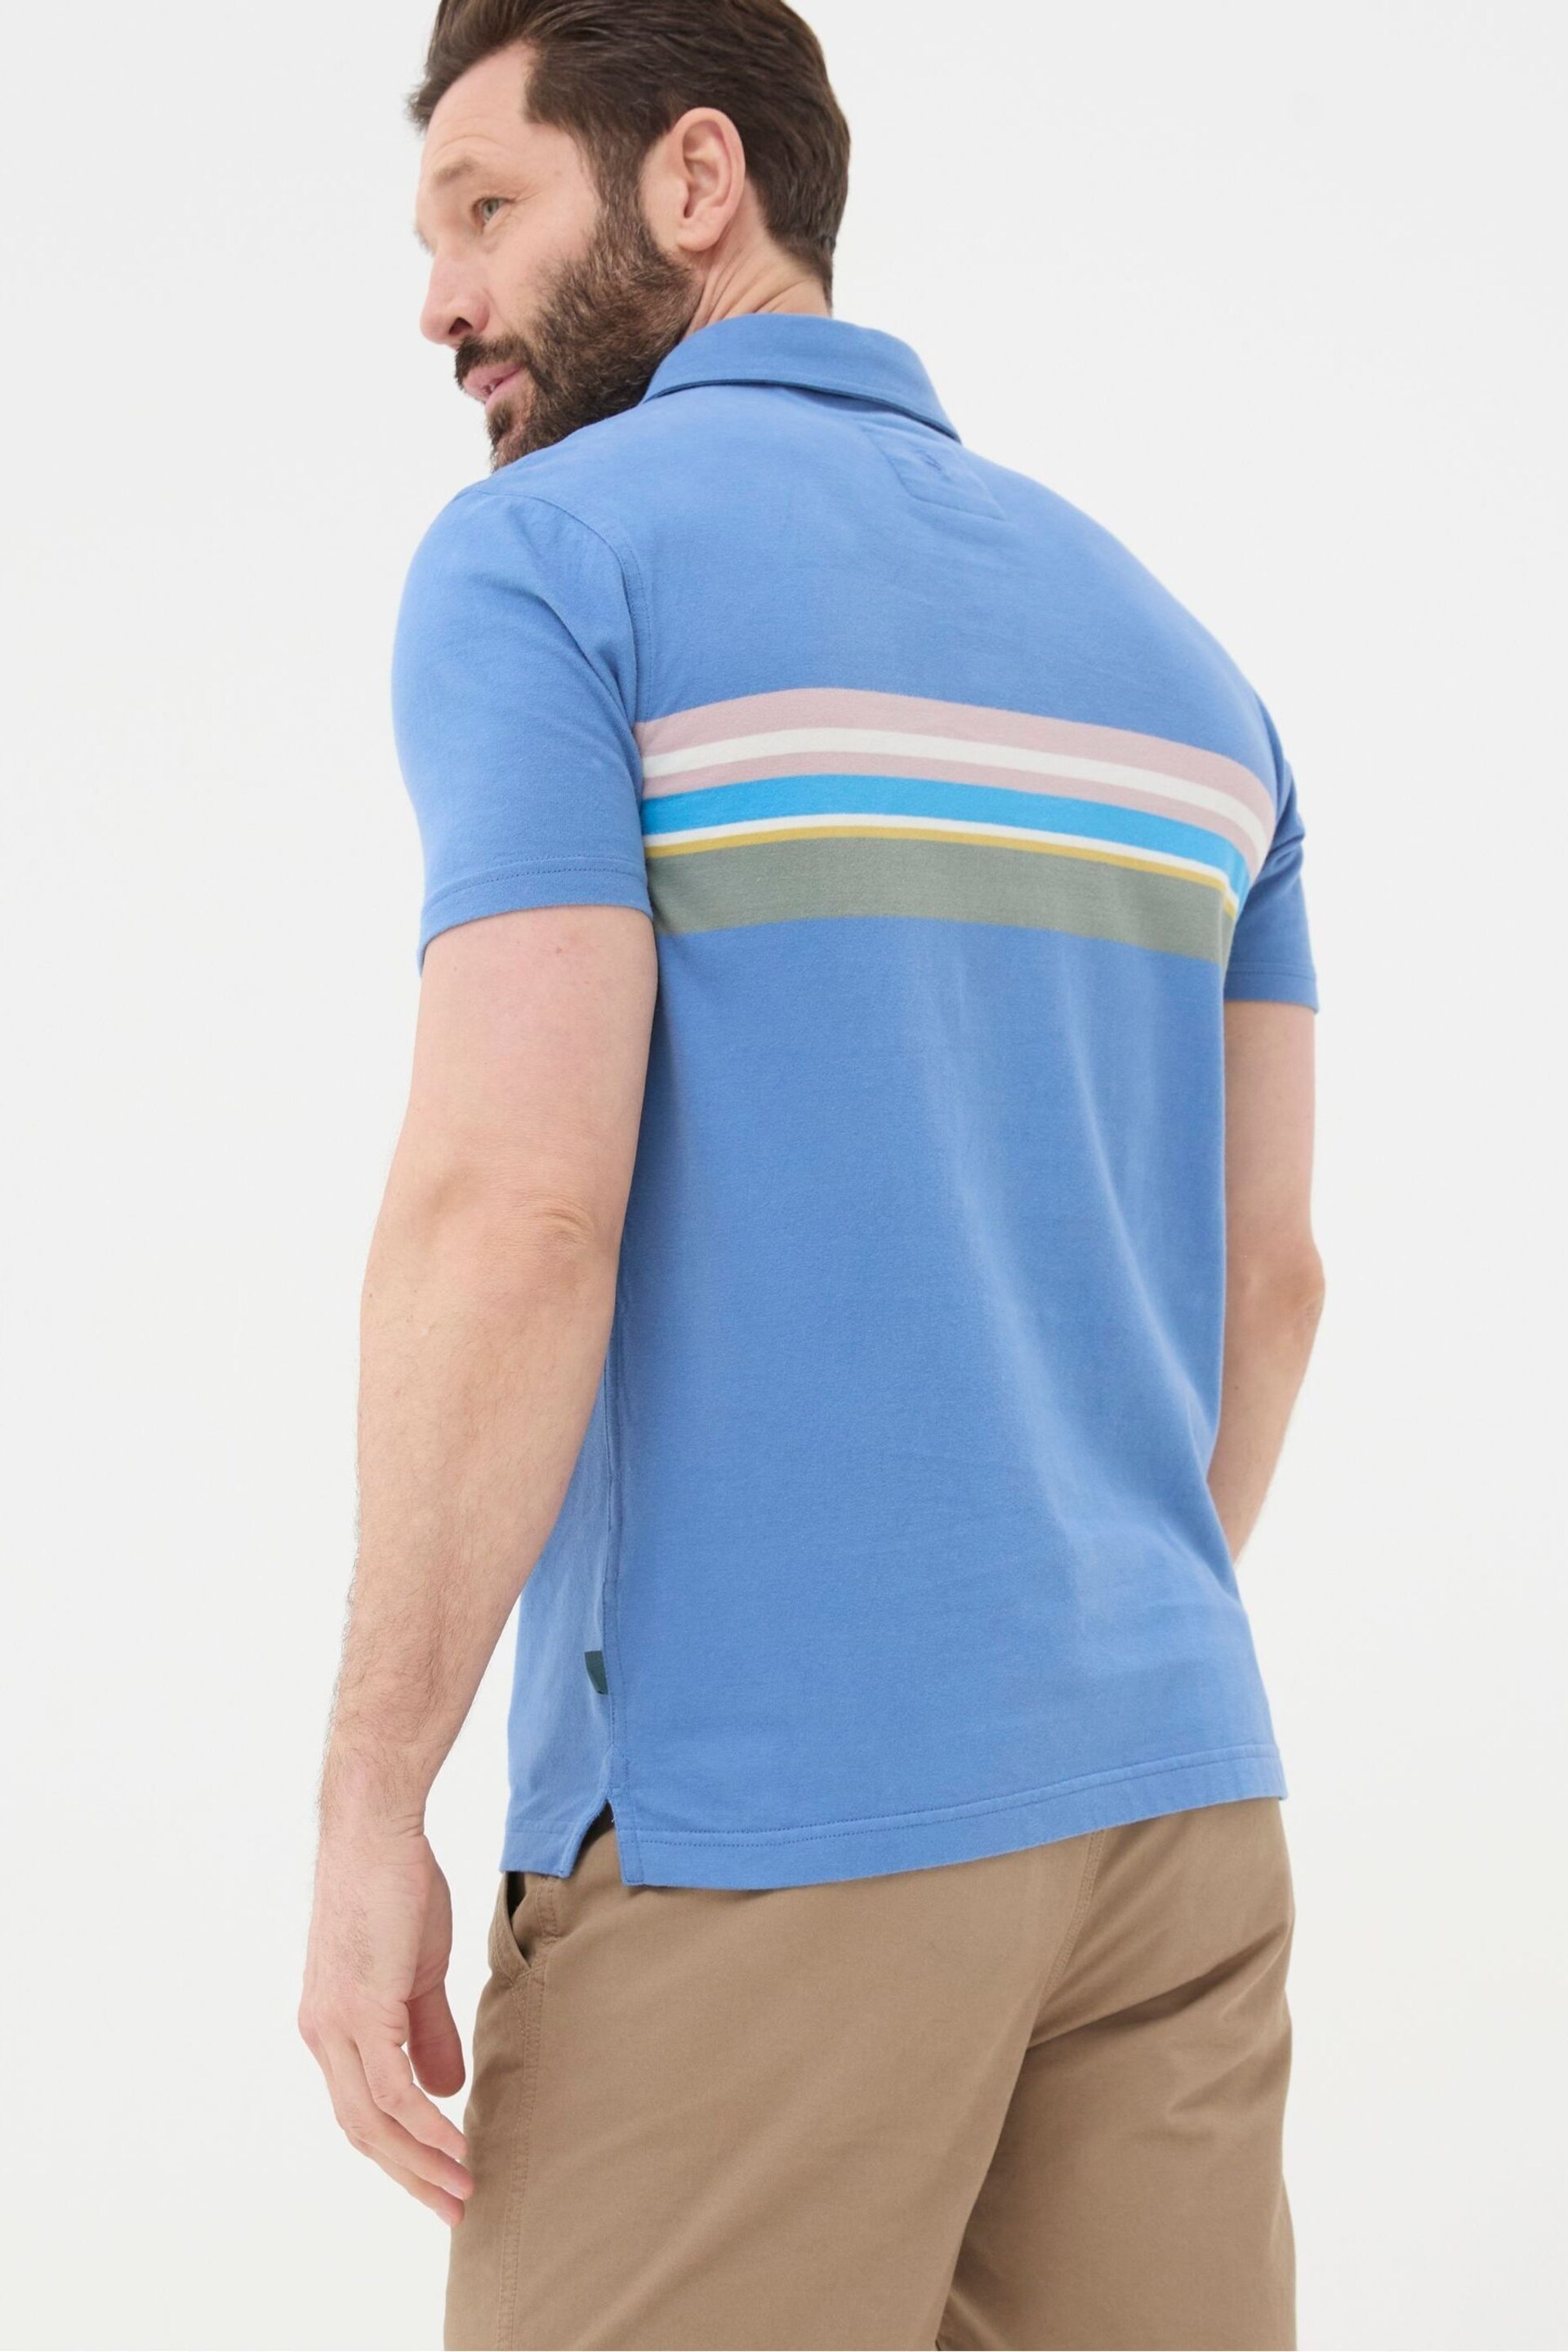 FatFace Blue Chest Stripe Polo Shirt - Image 2 of 5